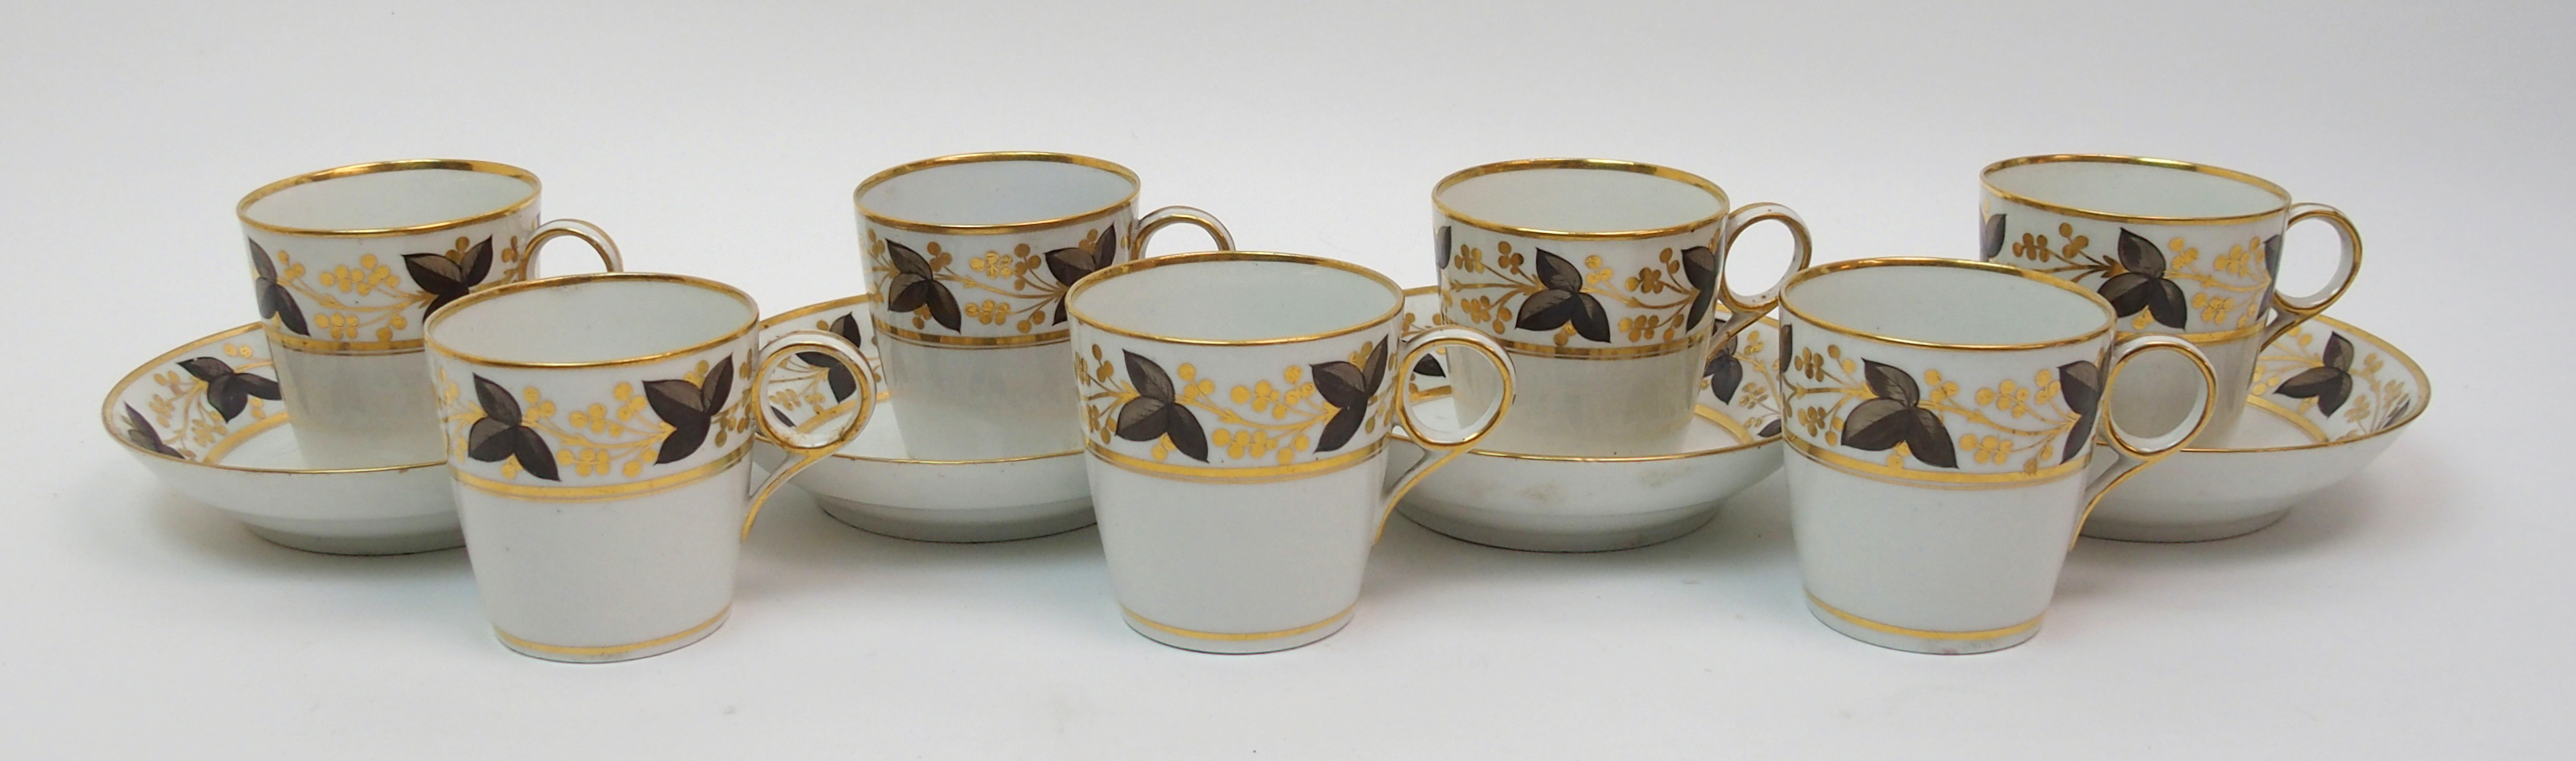 An early 19th Century Chamberlains Worcester porcelain part tea and coffee service painted in - Image 7 of 10